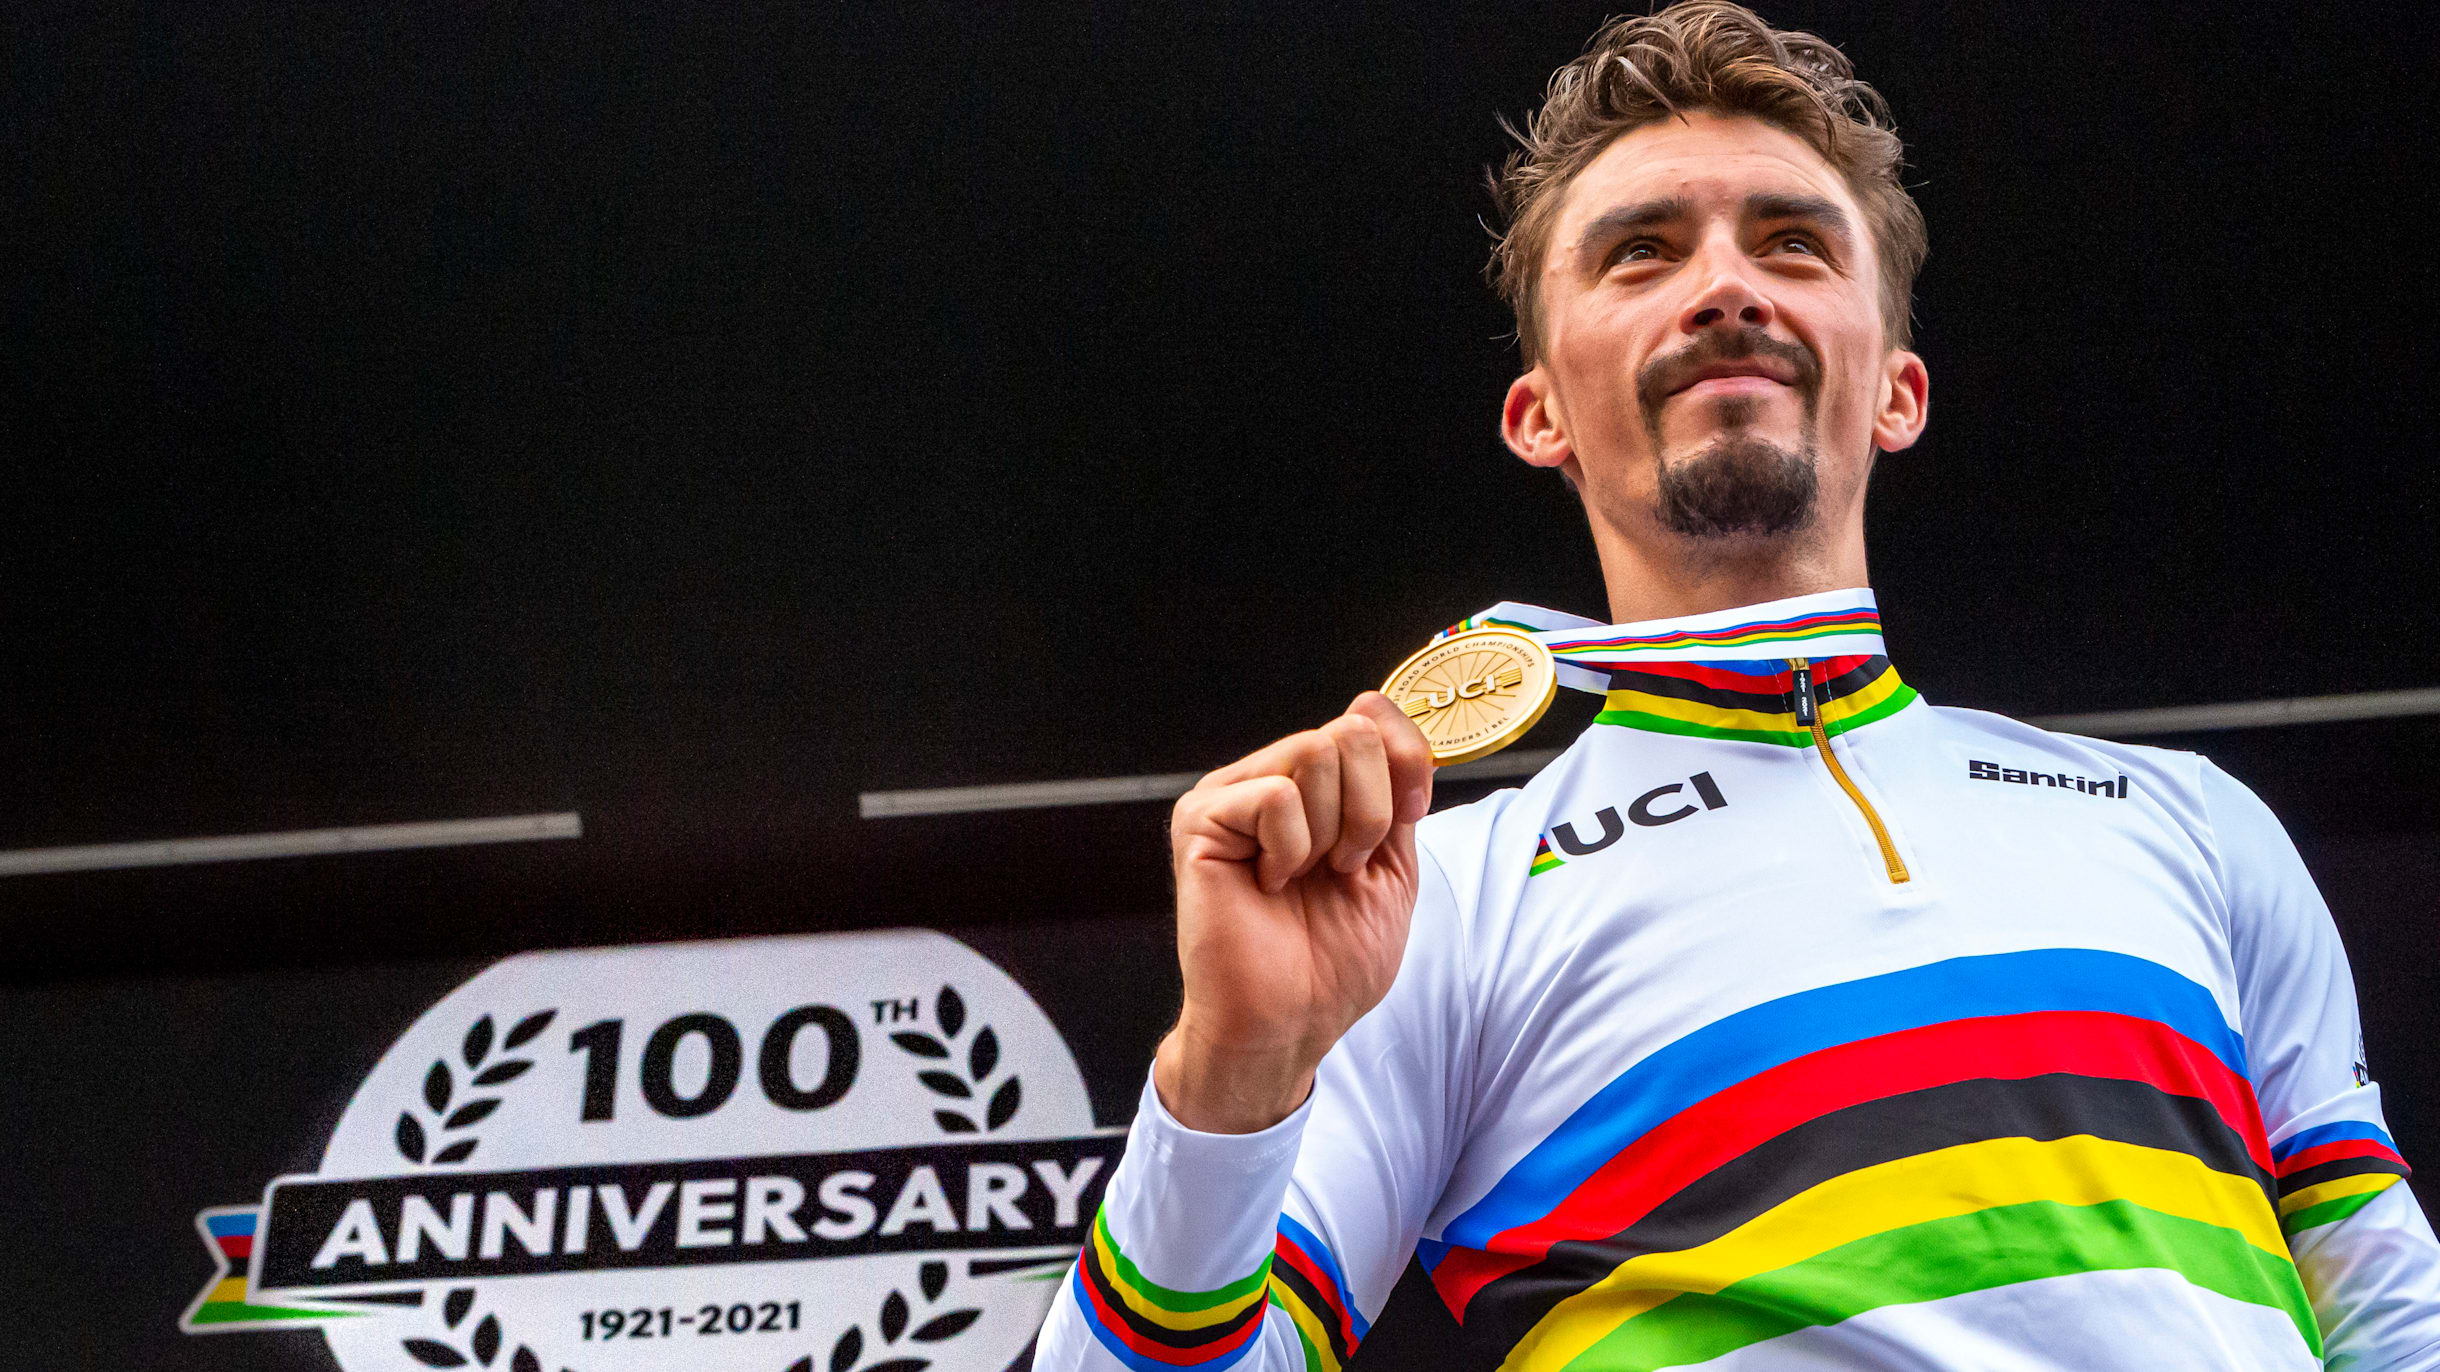 2022 UCI Road World Championships in Wollongong Preview, schedule, cycling stars in action and how to watch